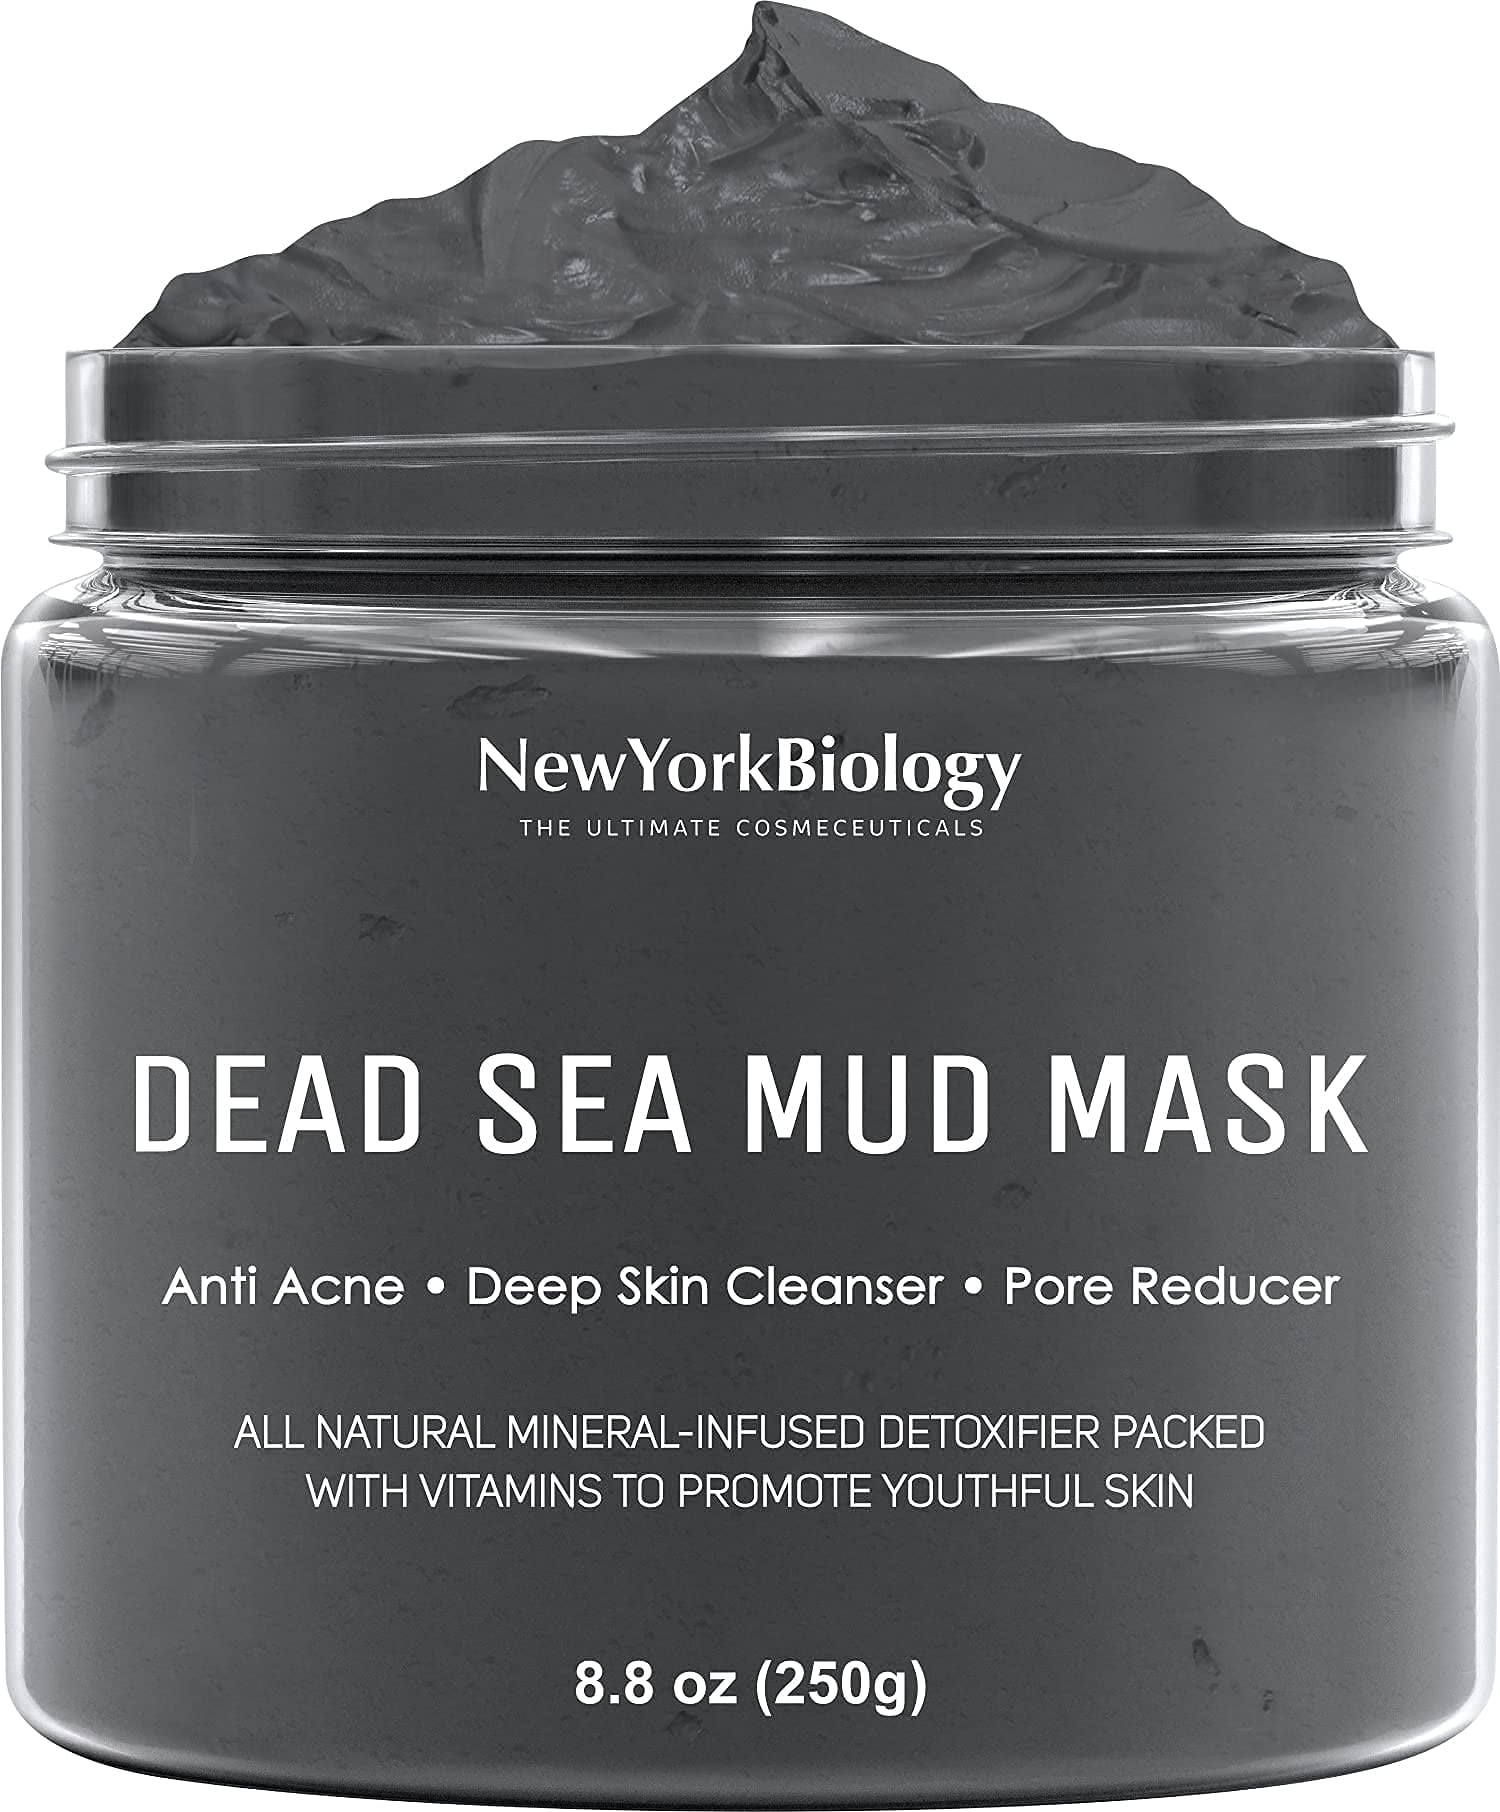 New York Biology Dead Sea Mud Mask for Face and Body - Spa Quality Pore for Acne, Blackheads and Skin, Natural Skincare for Women, Men - Tightens Skin for A